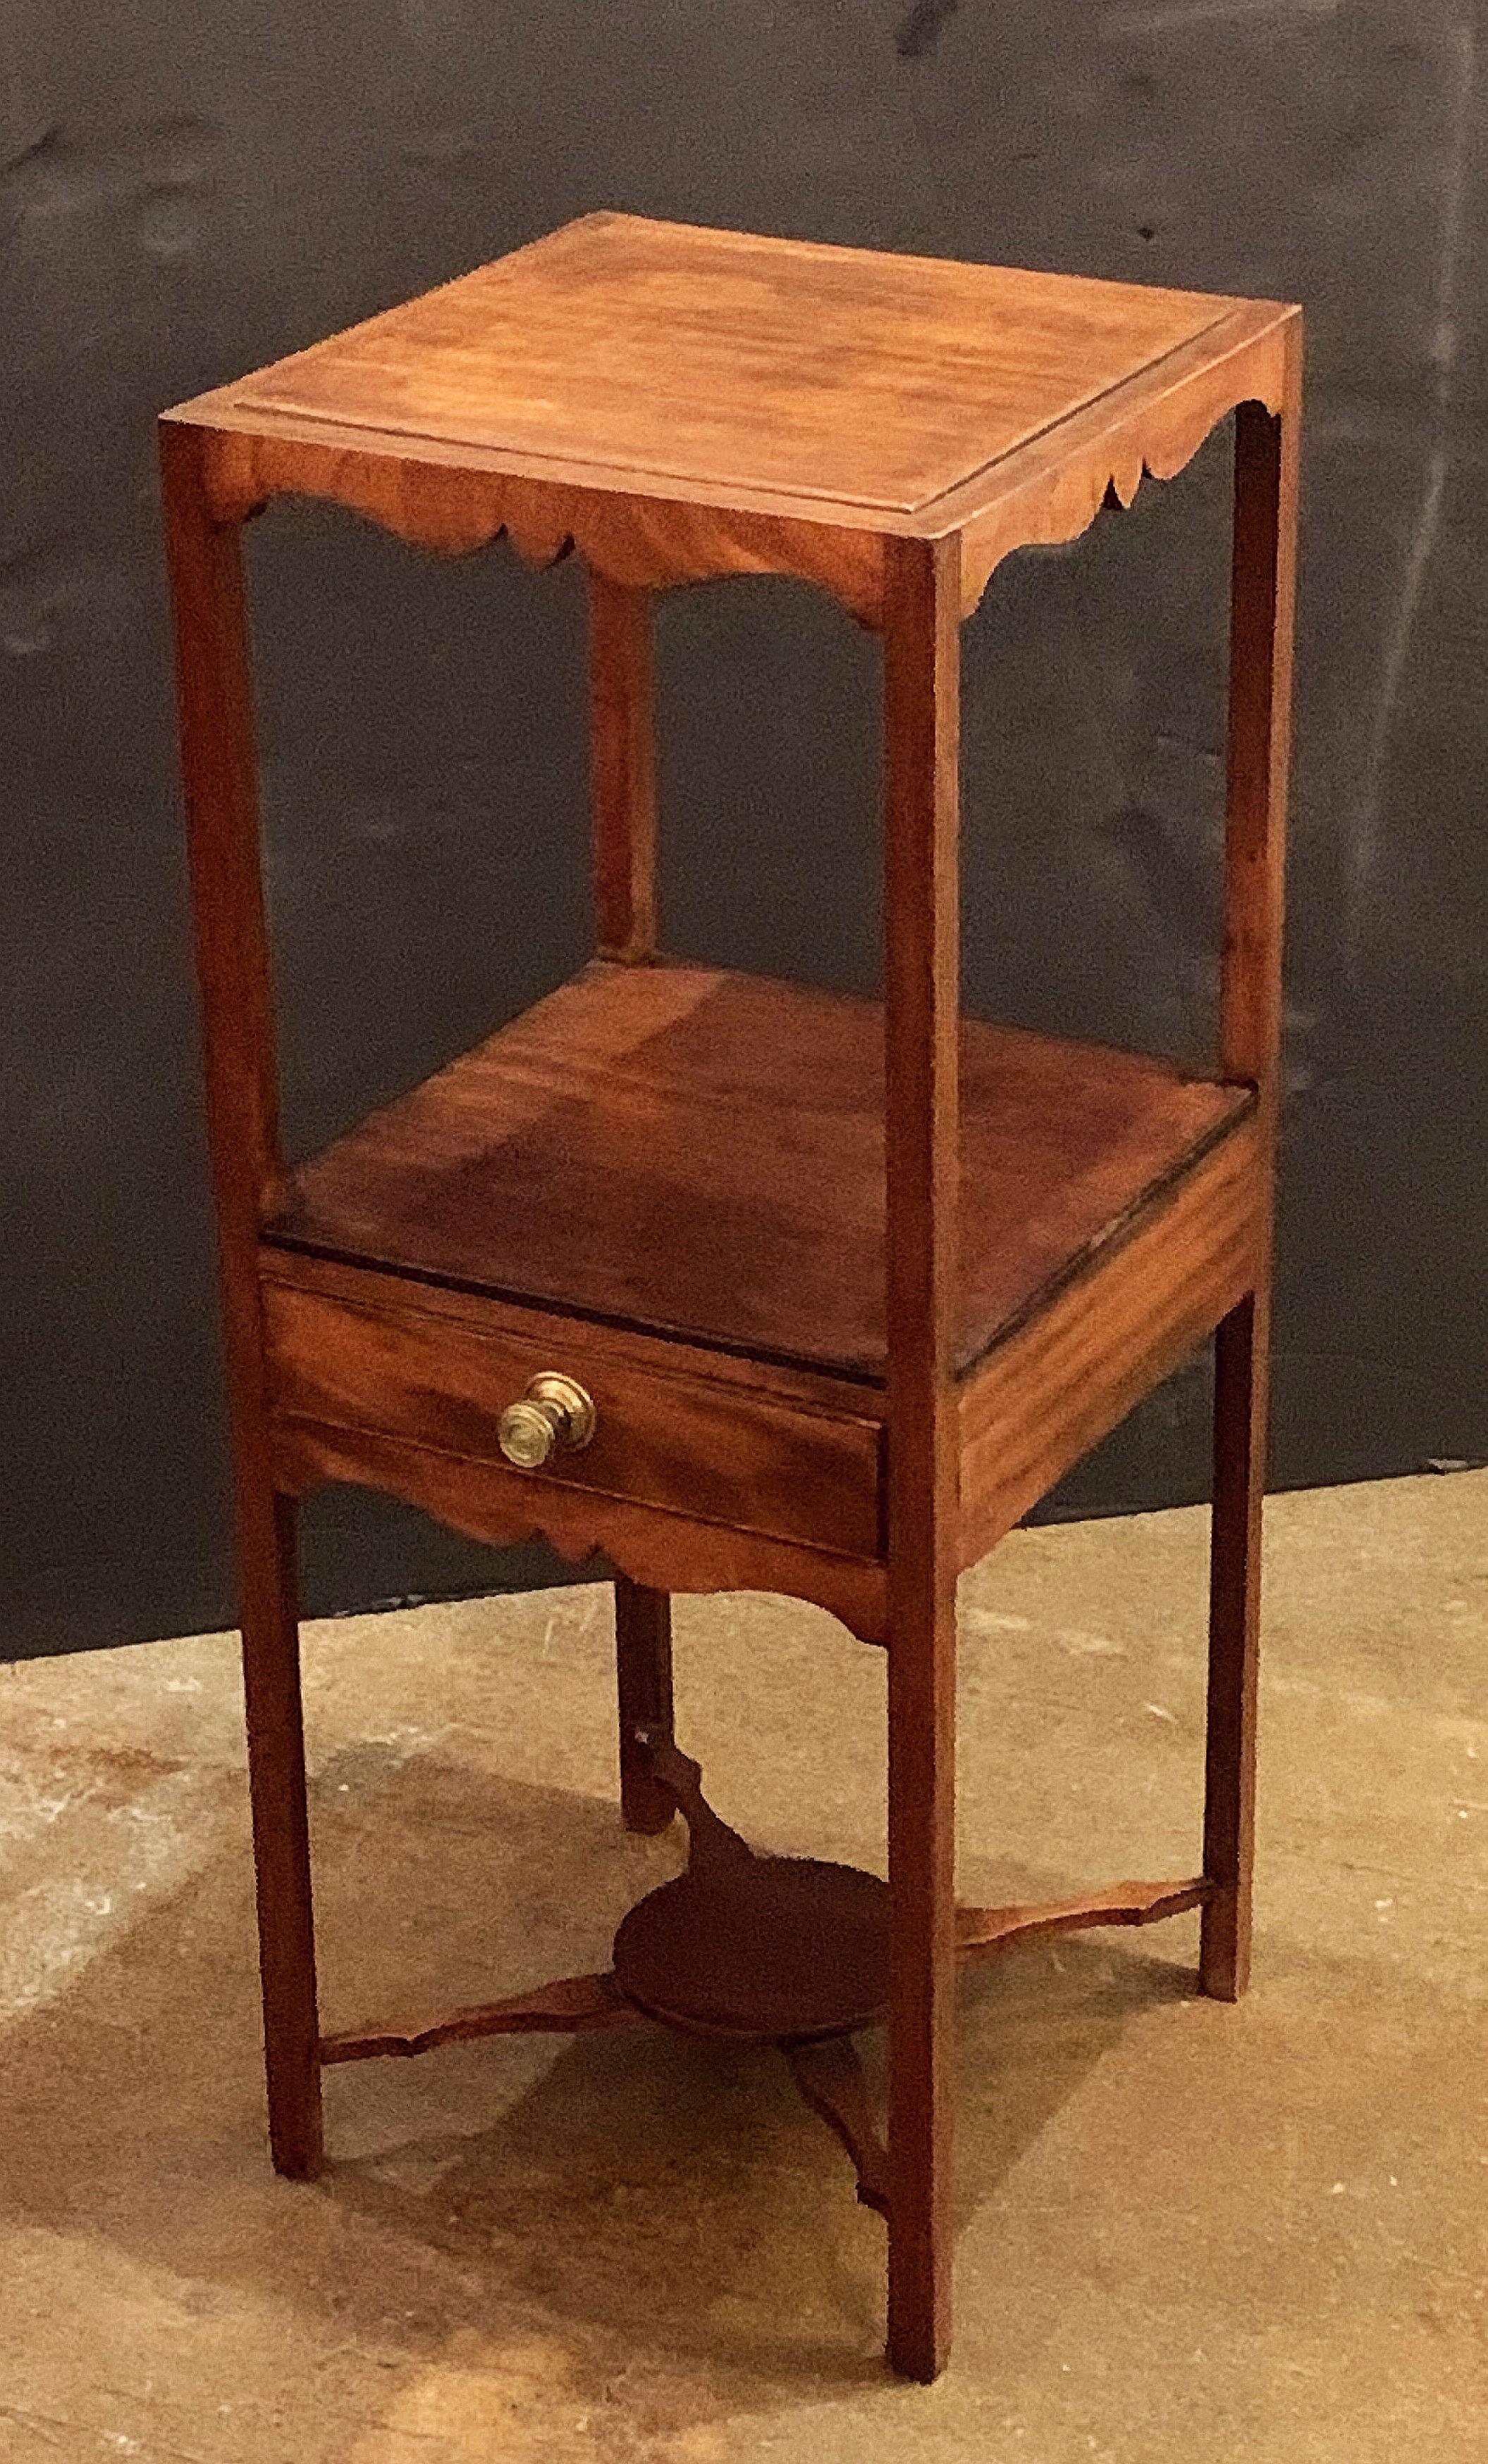 A fine English bedside end table or nightstand (or night stand) of mahogany, with molded top over two tiers, one with shelf and small pull drawer, the other a stretcher support.

Dimensions: H 32 inches x W 13 inches x D 13 inches.

Makes a great